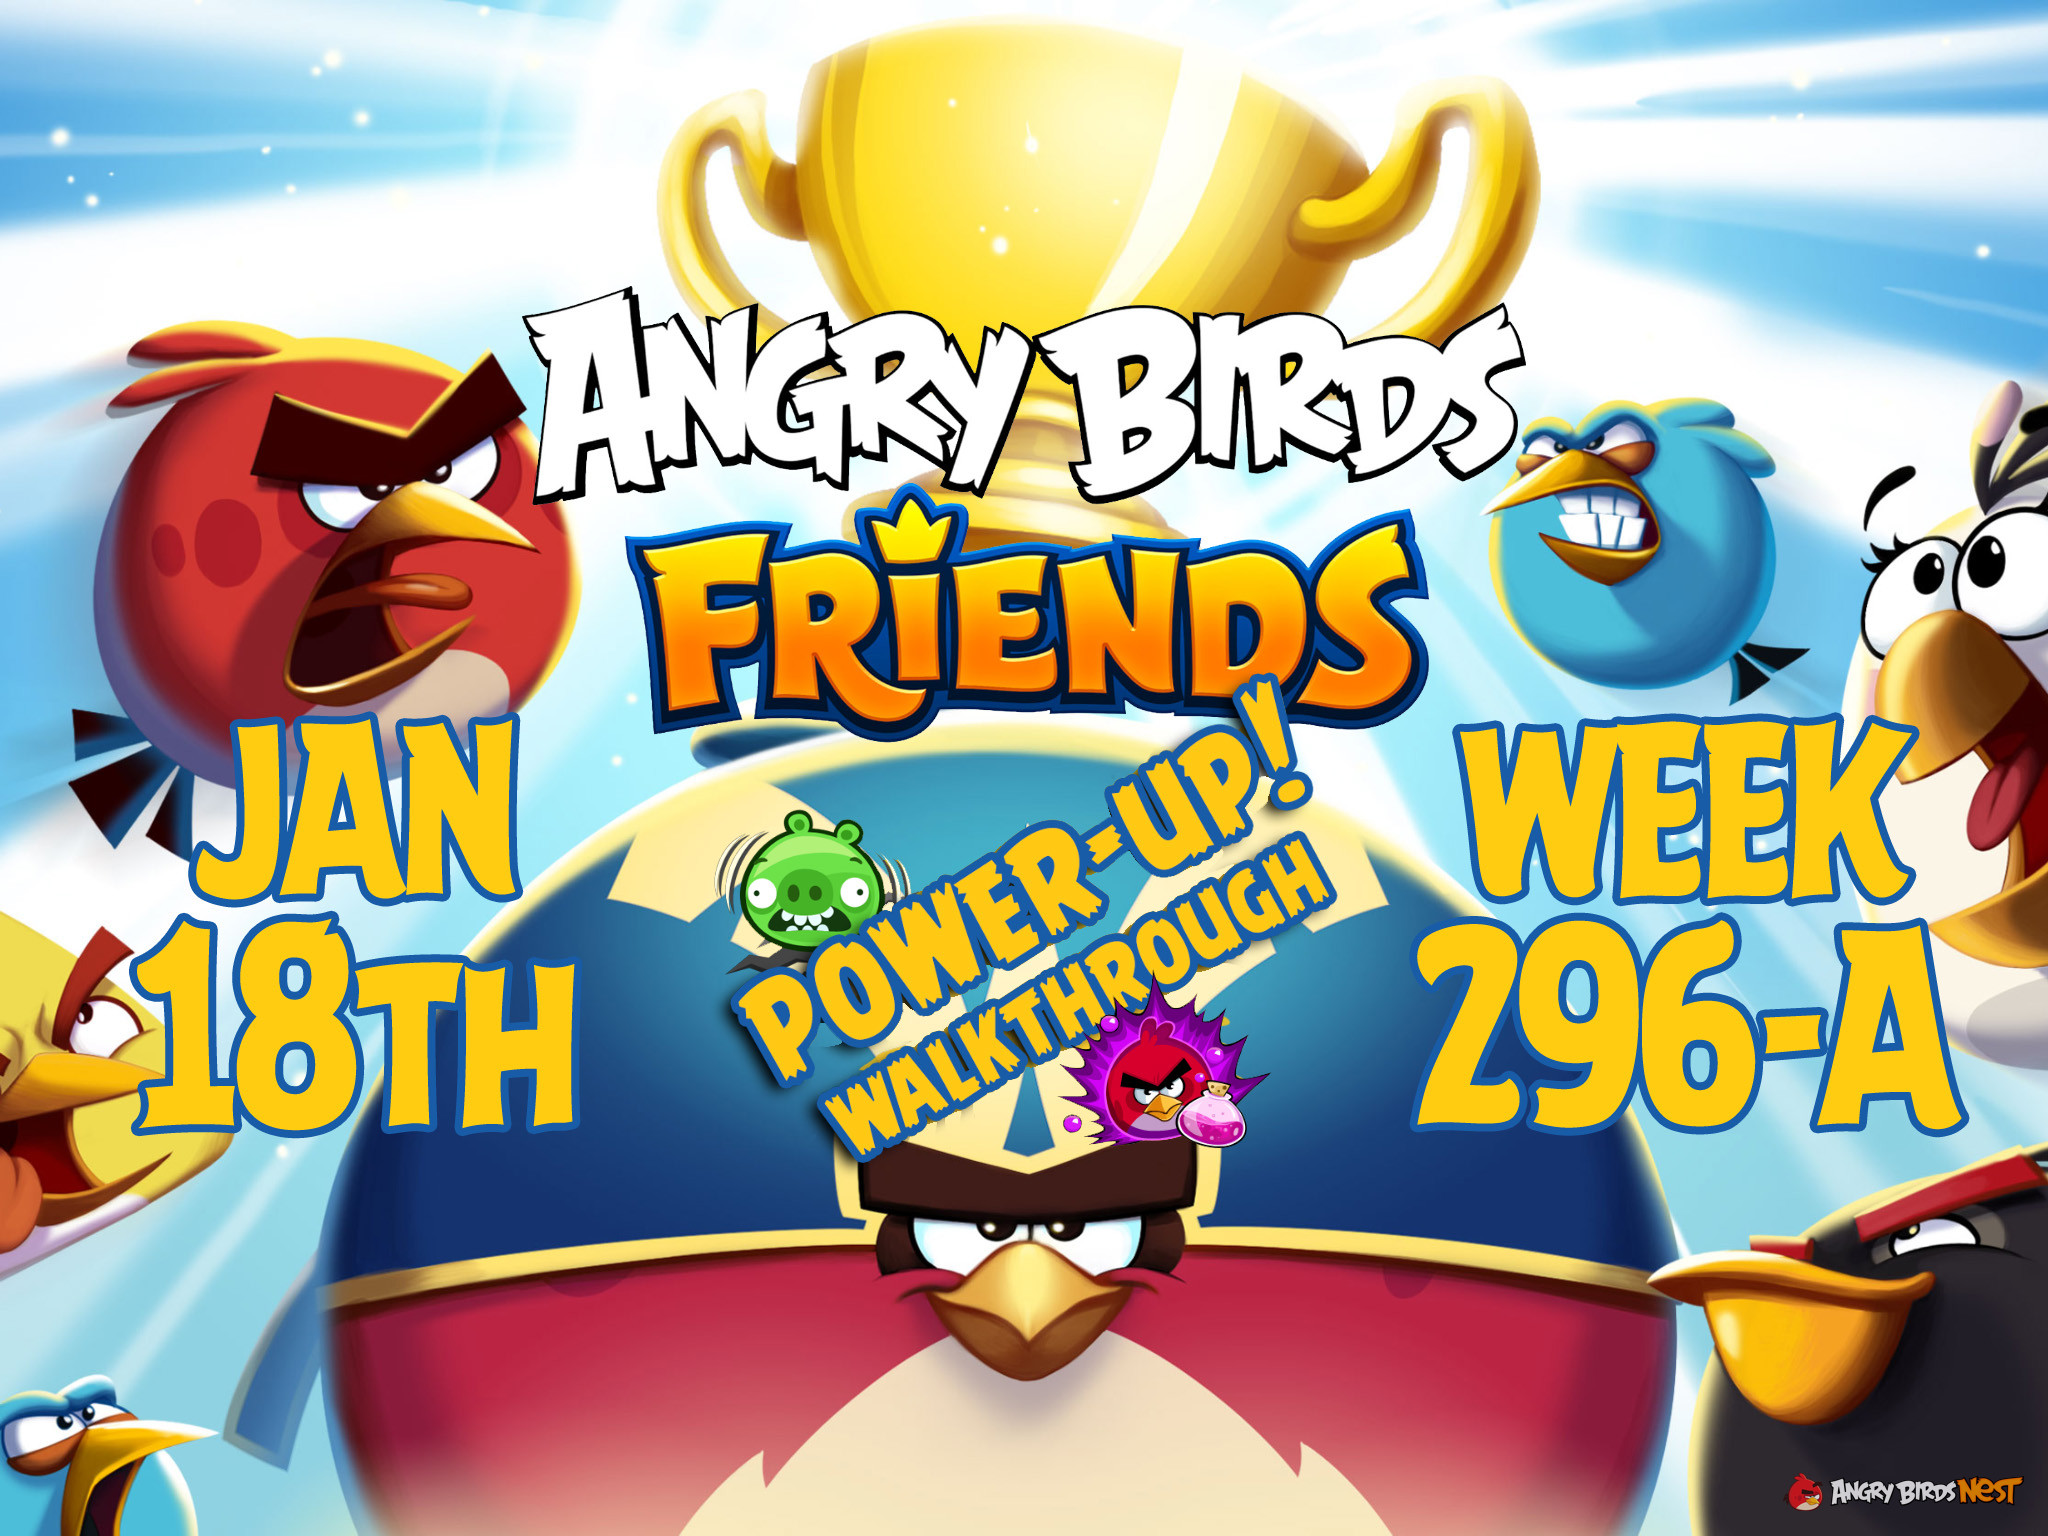 Angry Birds Friends Tournament Week 296-A Feature Image PU